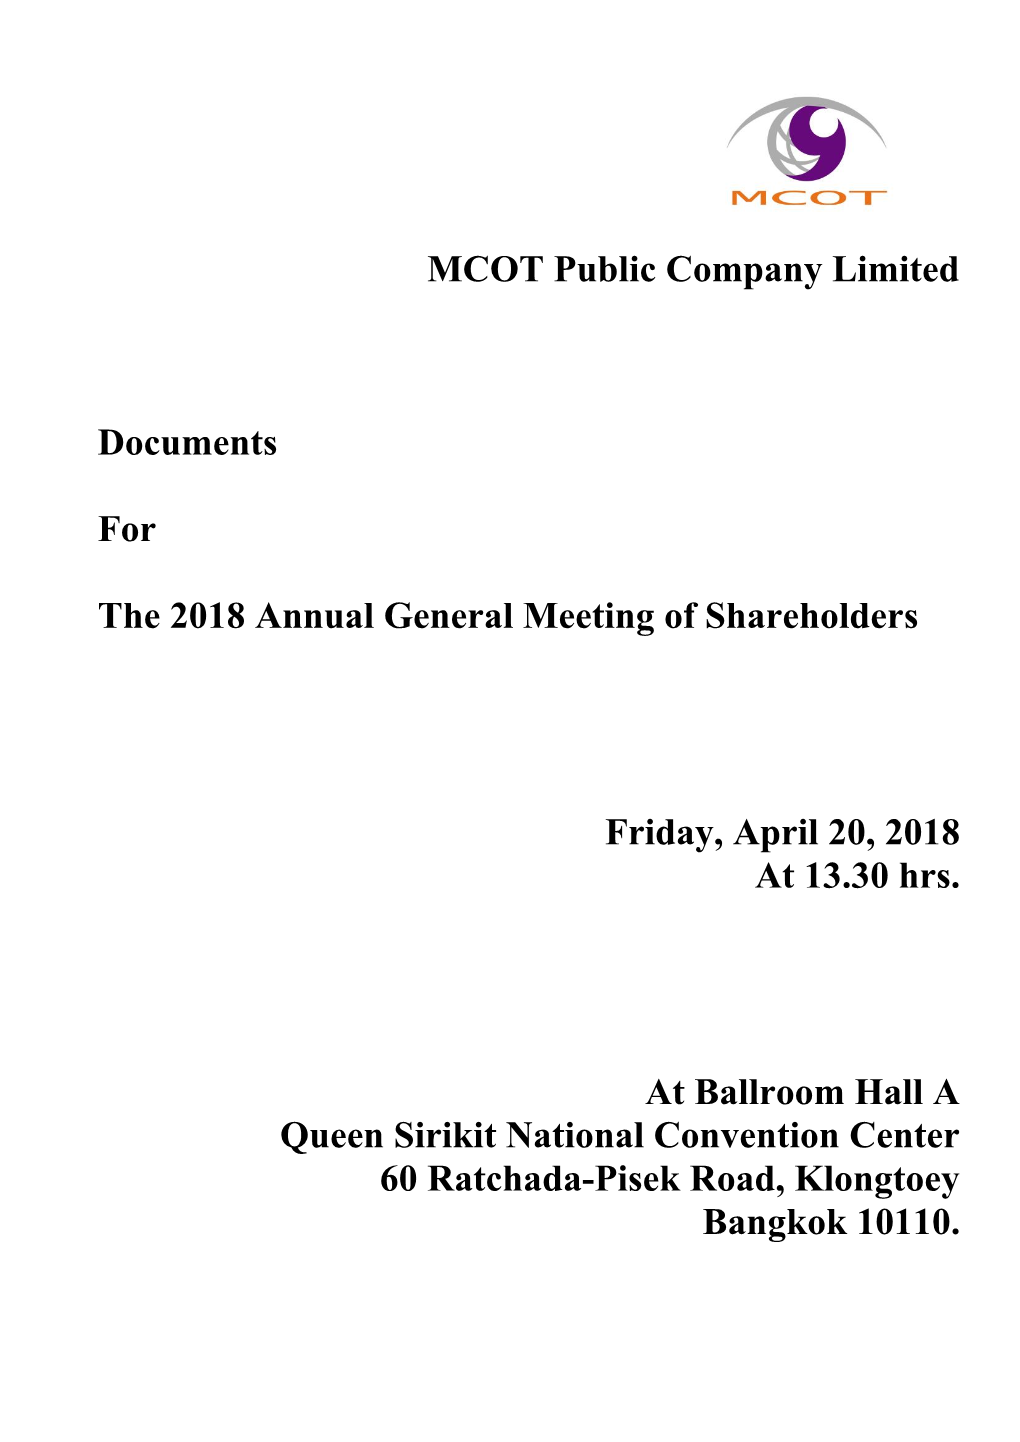 MCOT Public Company Limited Documents for the 2018 Annual